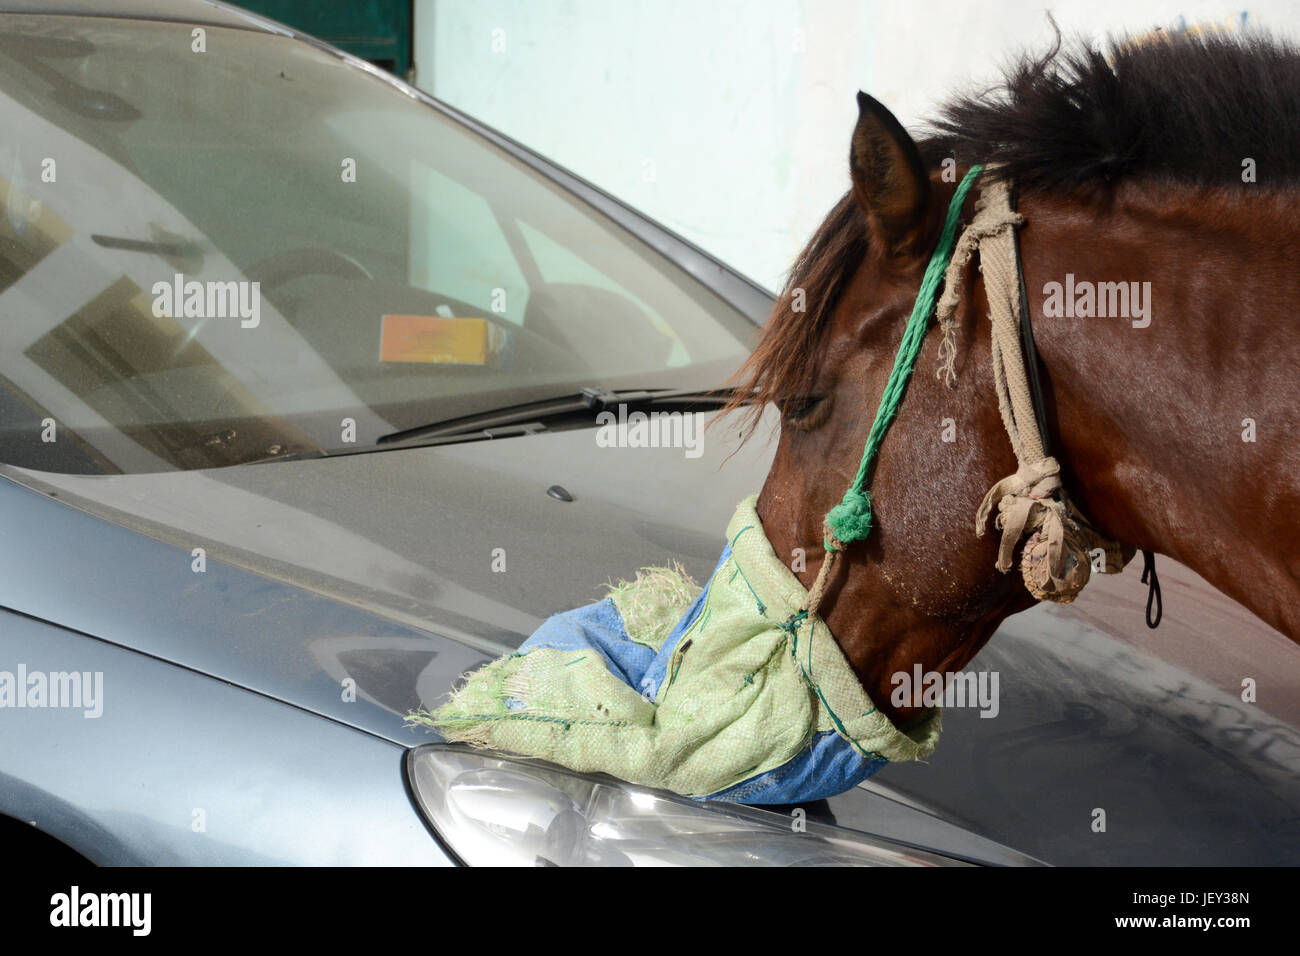 Horse eating from the feed bag in Yoff, Dakar, Senegal. Stock Photo